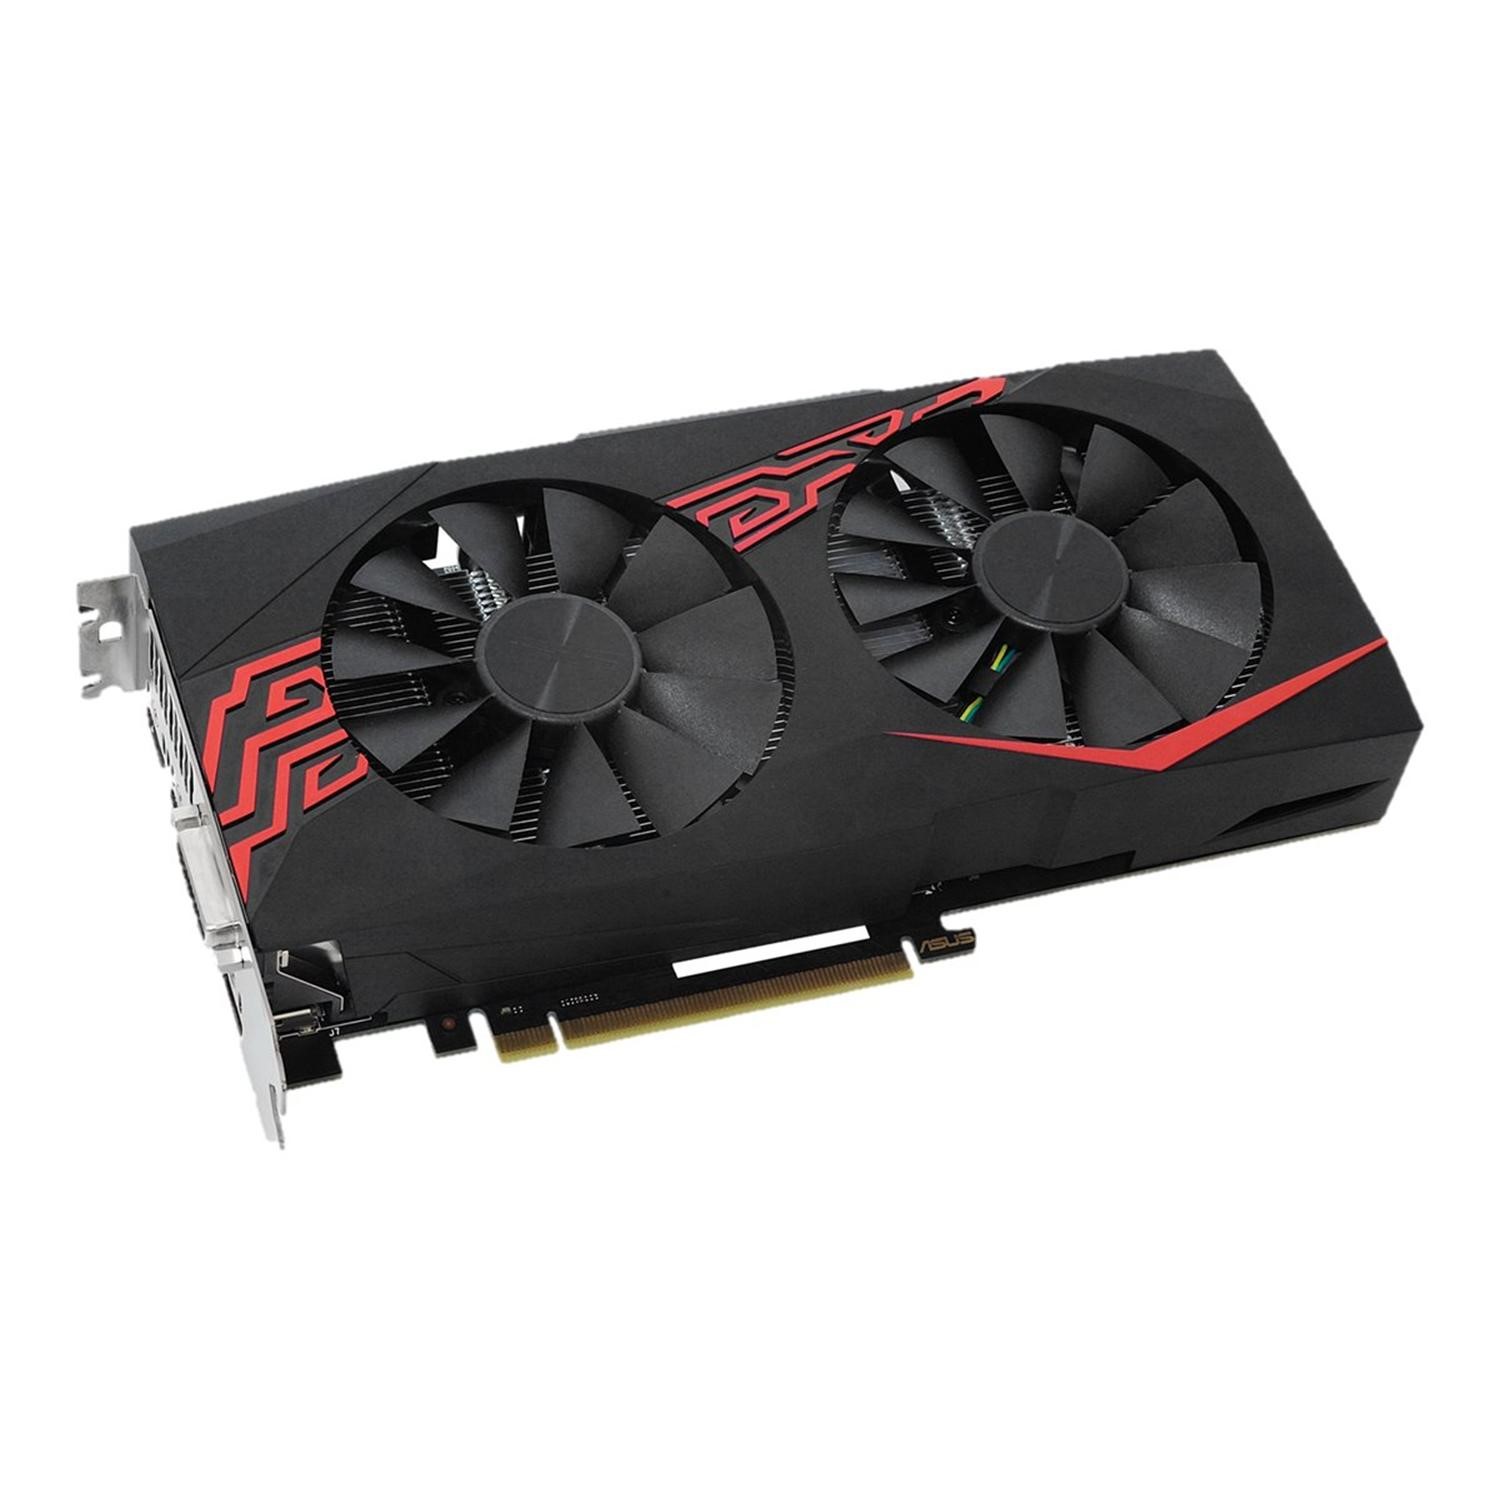 ASUS GeForce GTX 1060 6GB GDDR5 Graphics Card (DUAL-GTX1060-O6G) for sale  online